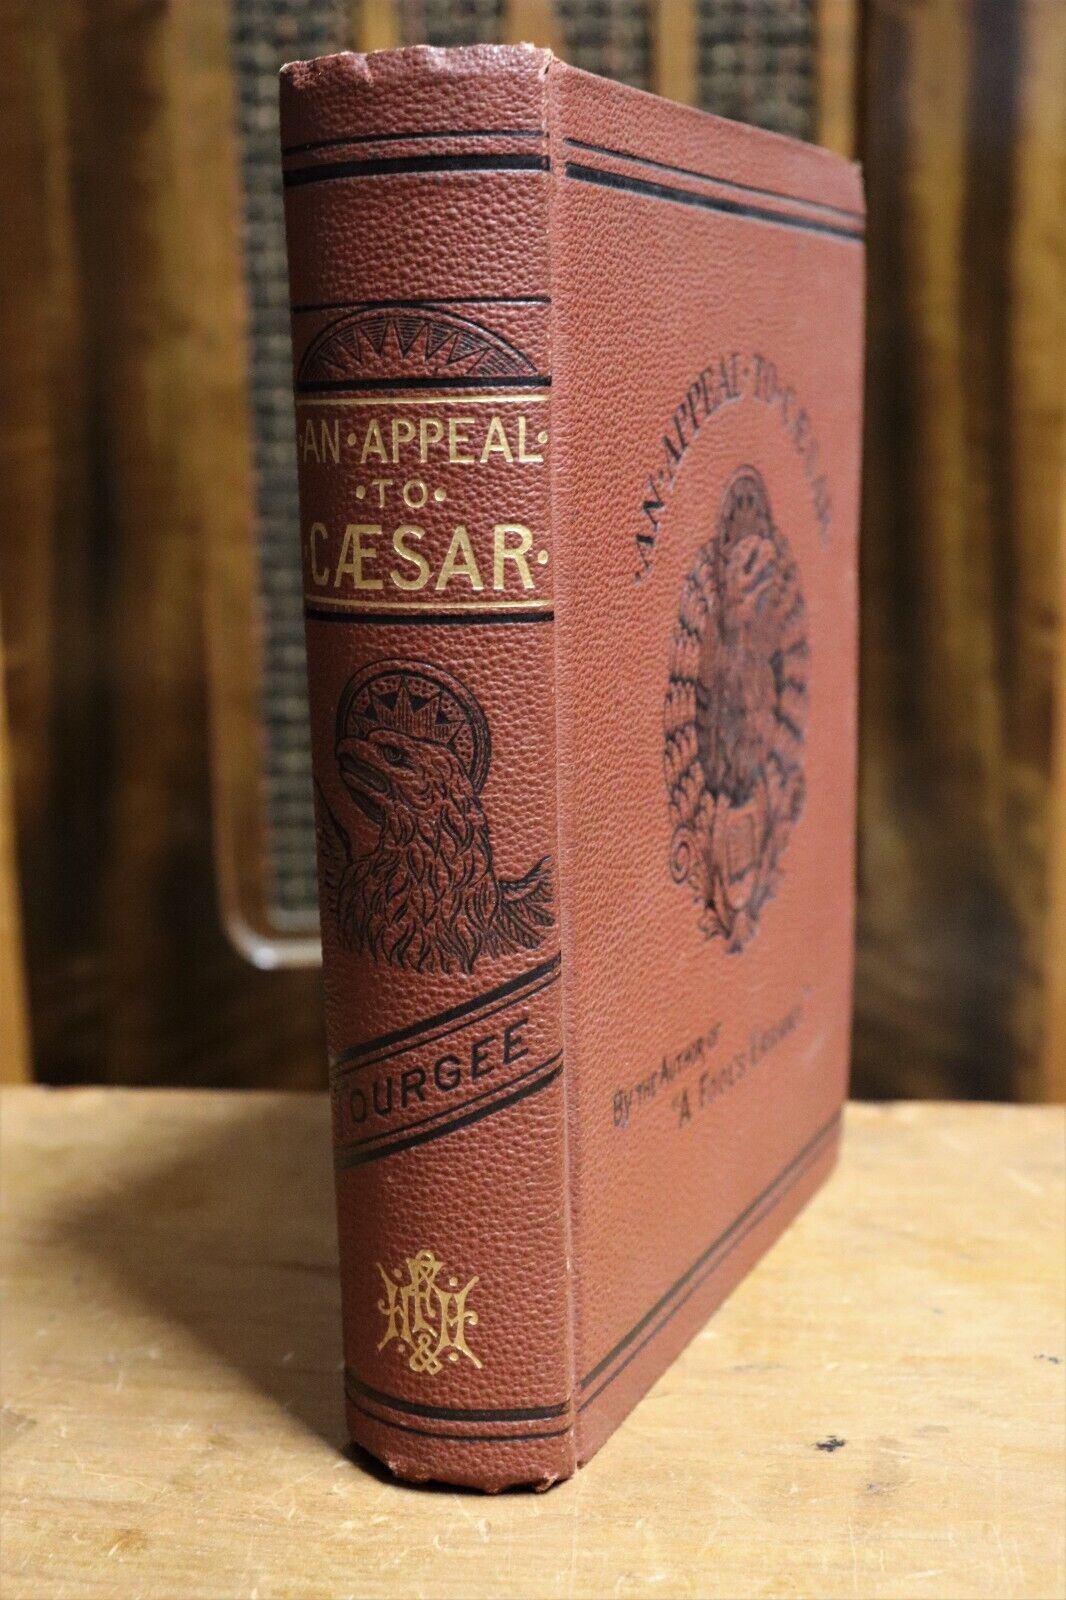 An Appeal To Caeser by Albion Tourgee - 1884 - Rare Antiquarian History Book